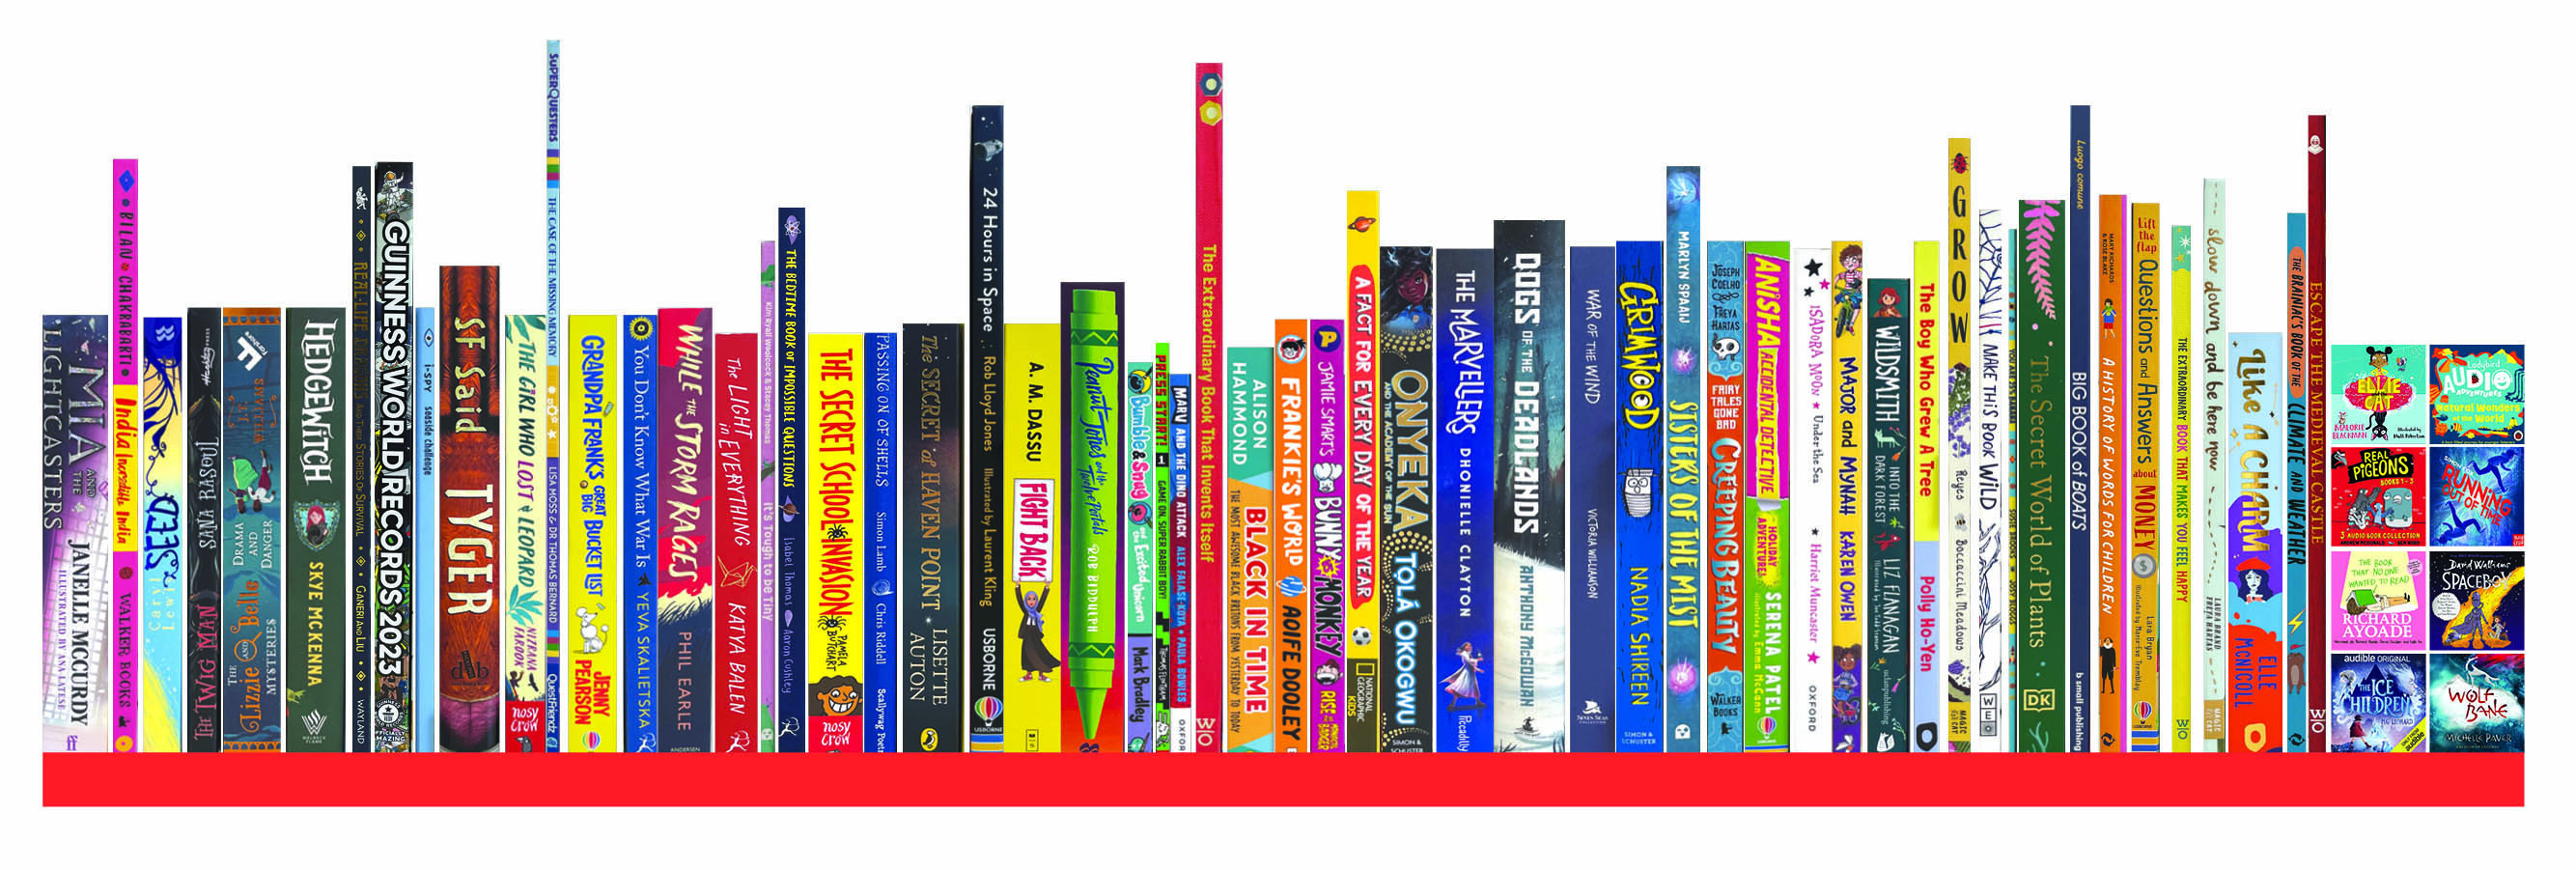 Win! All the books from our award shortlist 